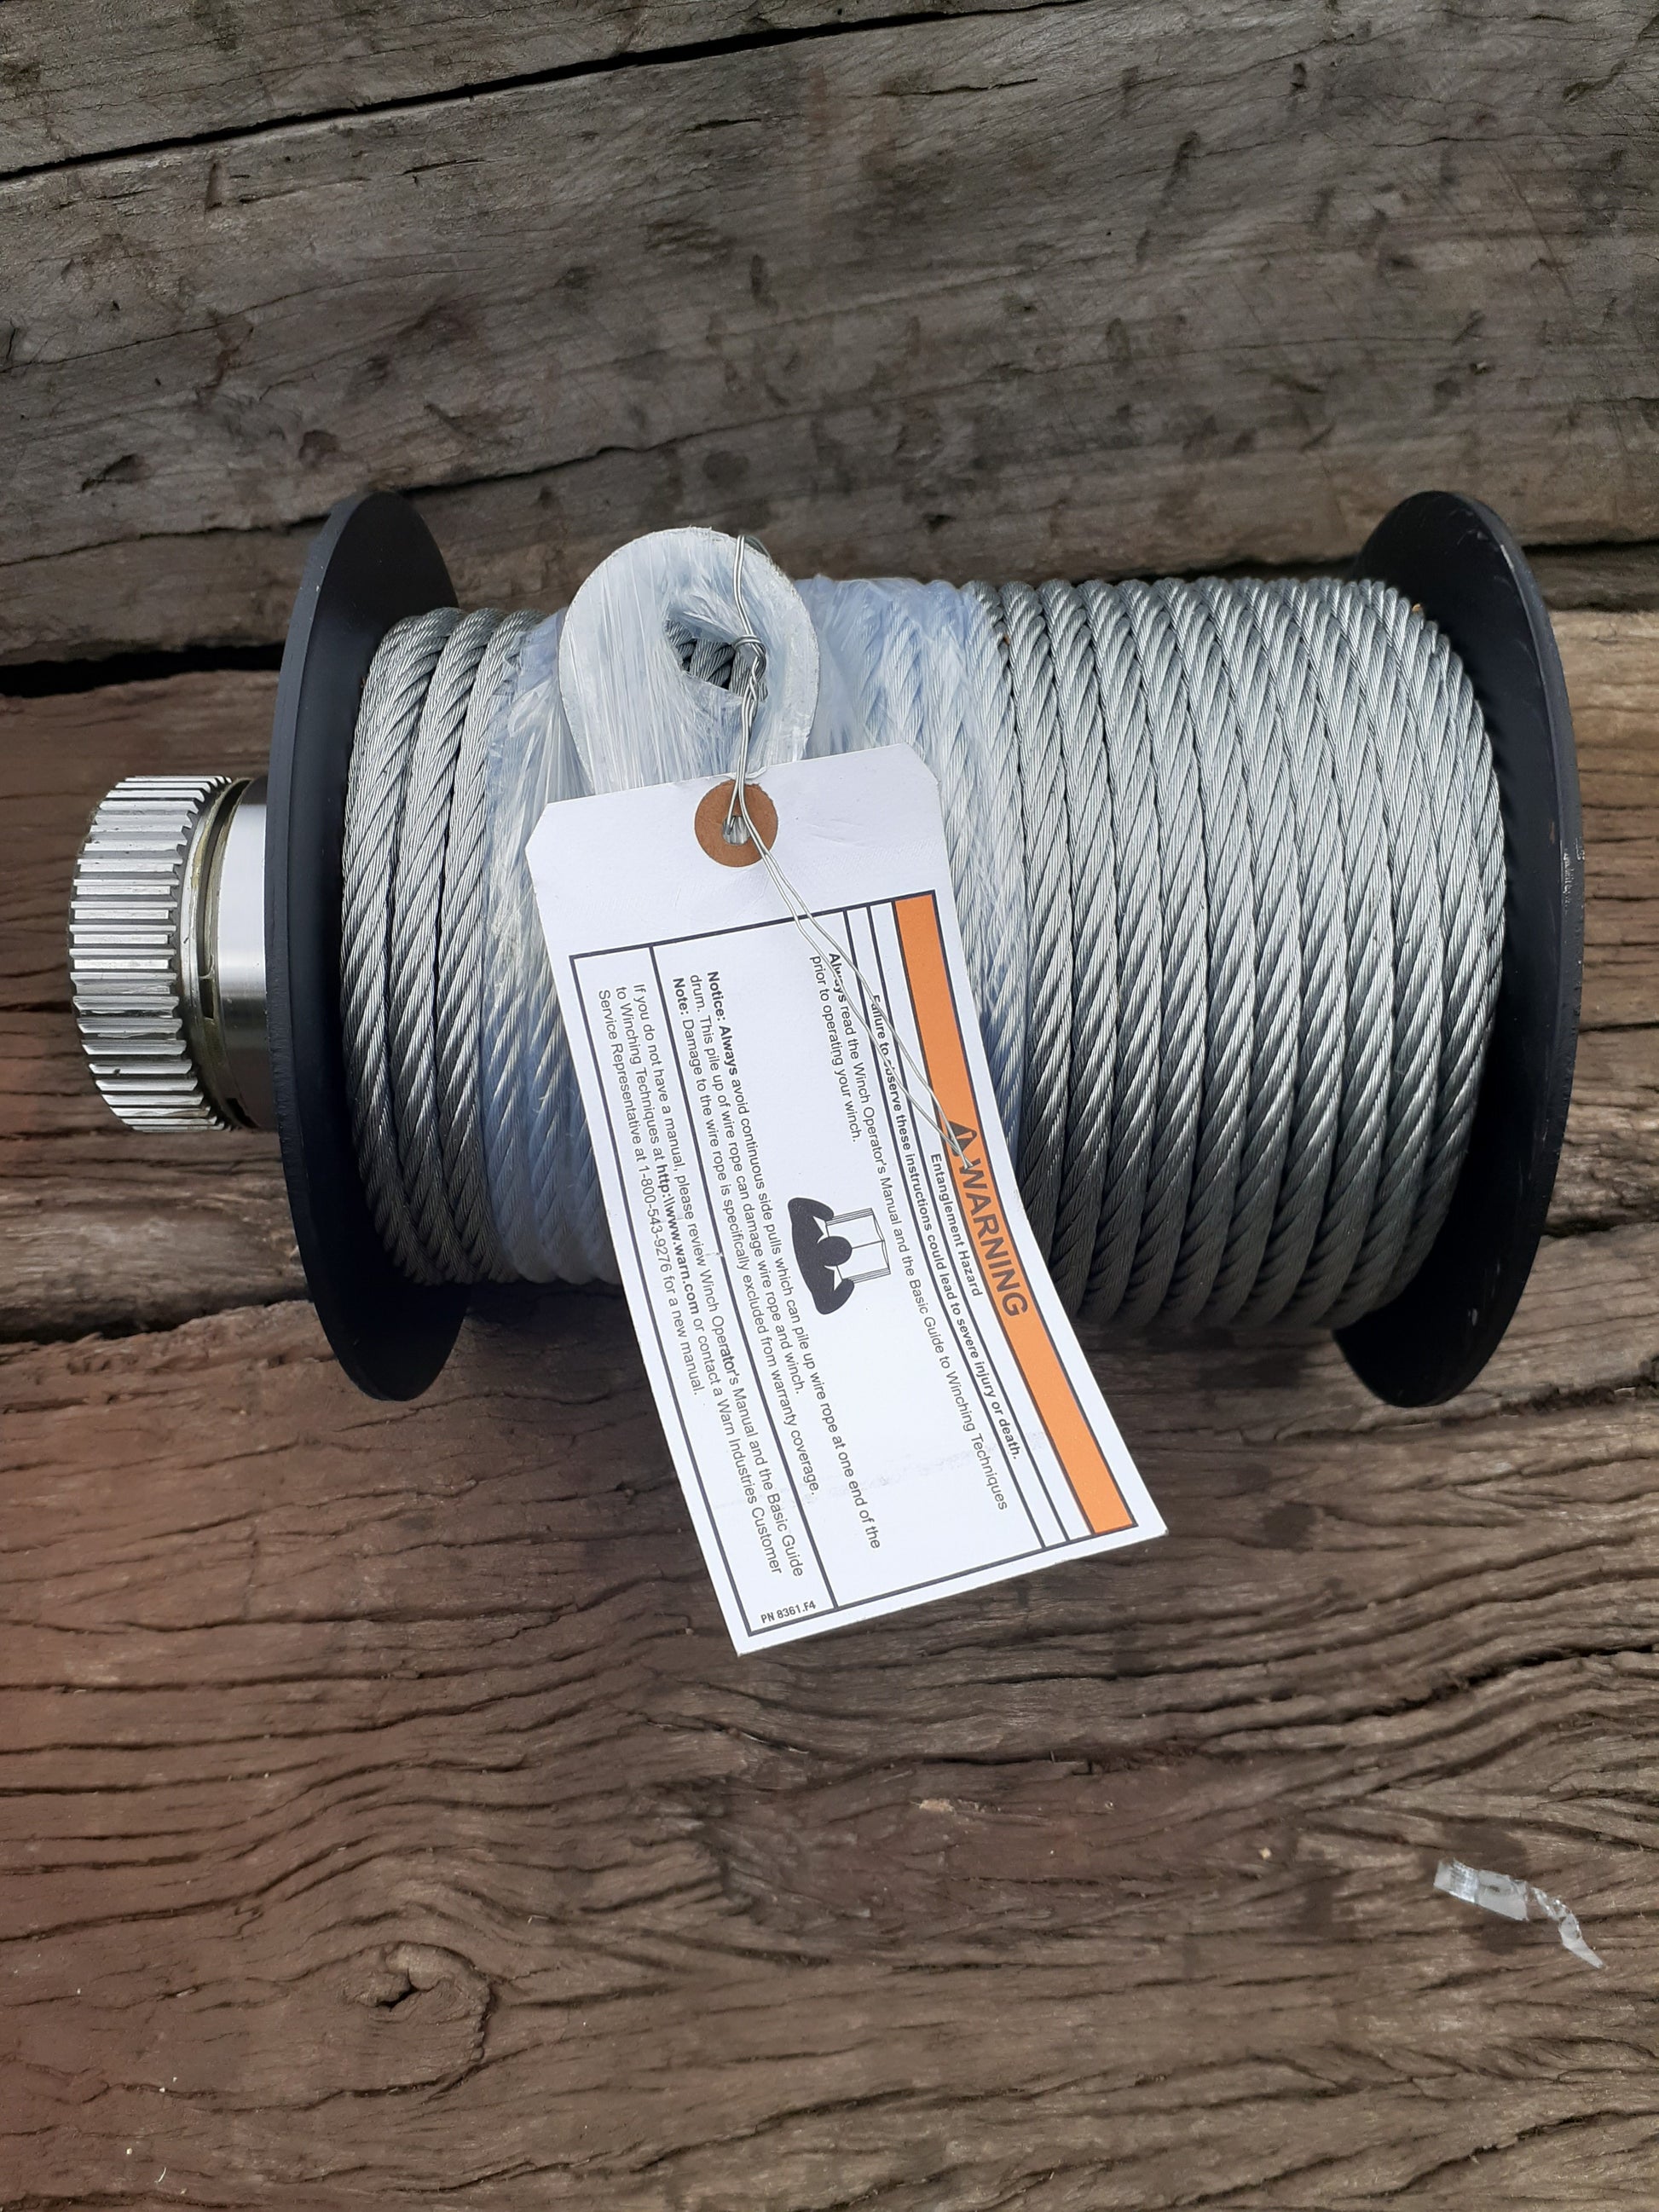 Genuine Warn drum with wire rope – The Highmount Guy